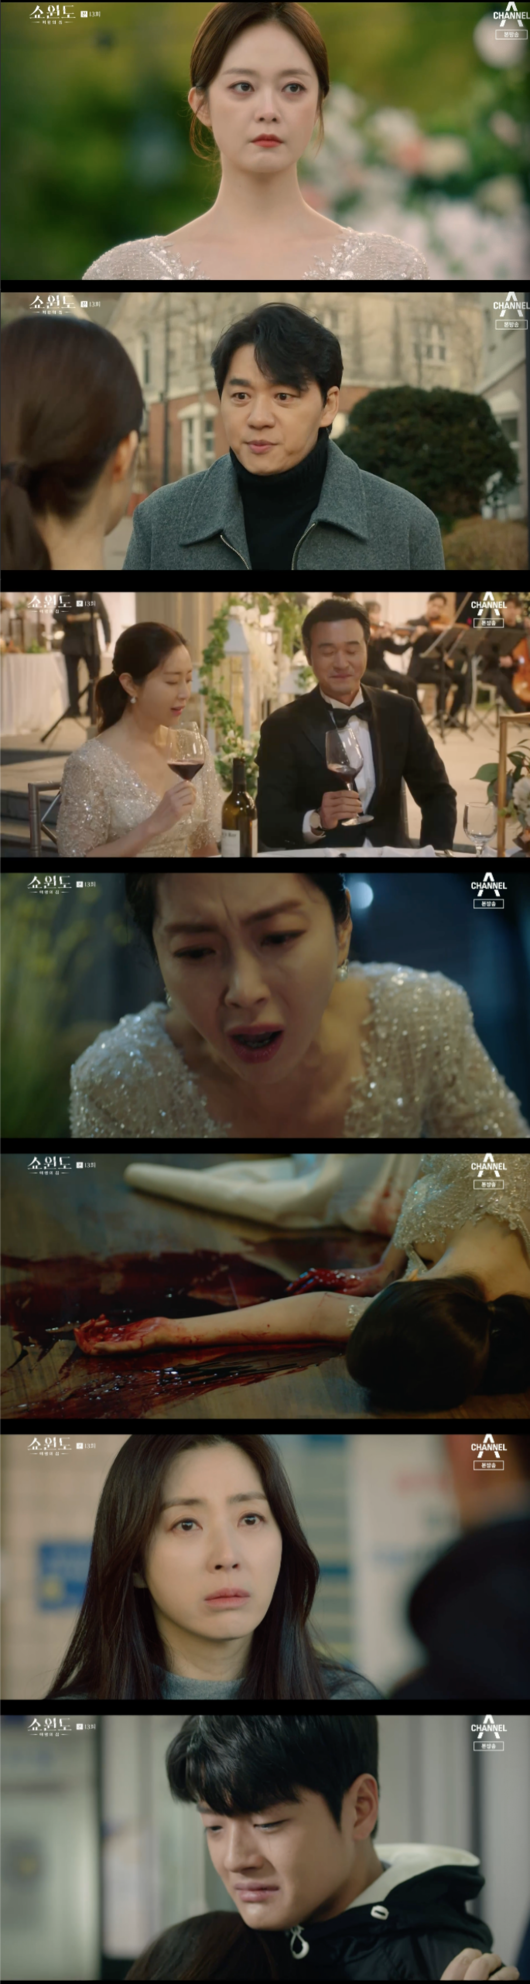 Showwindow: Queens House Park Sung-hoon stabbed Jeon So-min, ConfessionsIn the channel A 10th anniversary special drama Showwindo: The Queens House (playplayplay by Han Bo-kyung, Park Hye-young / Director Kangsol, Park Dae-hee), which was broadcast at 10:30 on the 10th, the remind wedding of Han Sun-joo (Song Yoon-ah) and Shin Myung-seop (Lee Sung-jae) was broadcast.Han Seon-ju told Shin Myung-sup, You and Yoon Mi-ra, you kissed me at my house. I heard from Tae-hee. You should have done Careful.He suggested, How about a remind wedding on our wedding anniversary?Han Sun-joo said, You and I, in the sense of recalling the mind when we started the first time, and most of all, it was just a passing wind to Tae-hee.I want to make sure that there is no problem or change in our family, and I want to show people that we are strong and strong. He went on to ask, The Queens Club people are betting on when were getting divorced. What do you think? You think?Shin felt uneasy that the attempt to bring down Kim Kang-im could fail and decided to do a remind wedding.Han Seon-ju sent a remind wedding invitation to pull him out when Yoon Mi-ra hid in the villa.Yoon Mi-ra, who had a poisonous spirit, found a ceremony and said to Cha Young-hoon, who dried himself, You can not stop me.I can not stop me until I kill me. At 7 p.m., the Remind Wedding began: they swore in front of many people that they would love forever. They kissed each other and the guests blessed them.At 7:20, Tae-hee found blood in his uncle Han Jung-won (played by Hwang Chan-sung), worried, Lets do some Careful, go home and apply medicine and come.Han Seon-ju, who enjoyed the back-and-forth together, headed home alone and found a knife on the floor. Han Seon-ju was embarrassed to see Yoon Mi-ra, who was stabbed by a knife.The housekeeper, who came home a step later than Han Seon-ju, cried out when he saw Yoon Mi-ra, who had fallen and Han Seon-ju, who was holding a knife.Shin Myung-seop and Han Jung-won, who reported to 119 and heard the screams and found the house, were also shocked to find Yoon Mi-ra and Han Sun-ju.On the other hand, as a suspect of Murder attempted on the same day, Tae Yong (Park Sang-hoon) was arrested and gave a shock reversal. Tae Yong said, Mom and Dad knew everything.So I stabbed her. Han Seon-ju said, You are not you. You are not you. Tae-yong said, I was right. Channel A Showwindow: Queens House broadcast screen captures